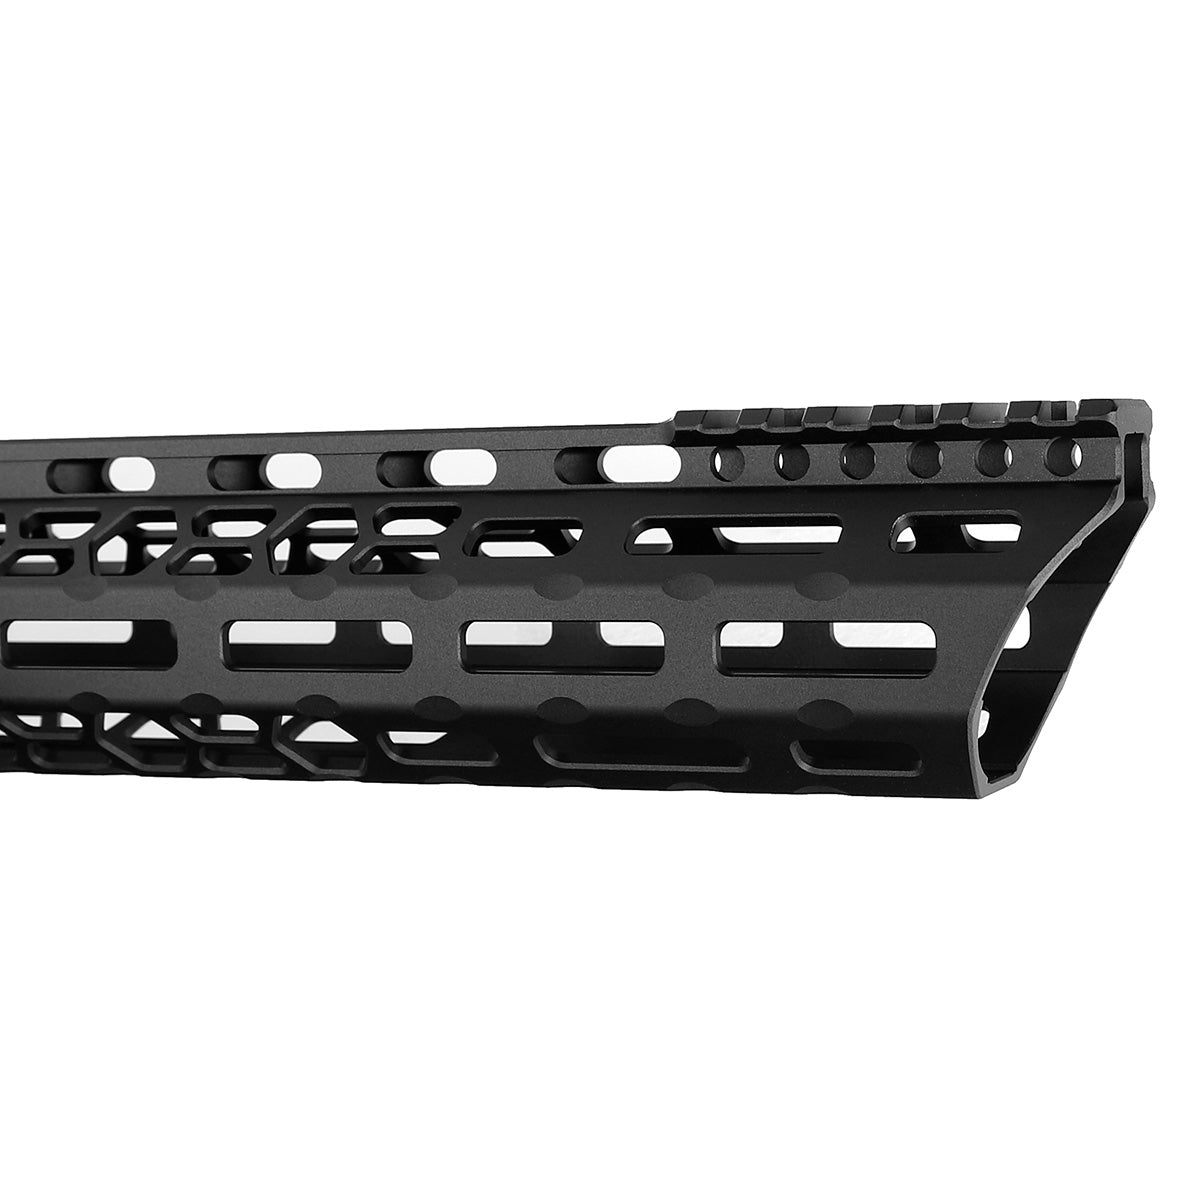 ohhunt® High Profile AR-10 LR308 M-lok Free-Float Handguard with Angle Cut Front - 17 inch